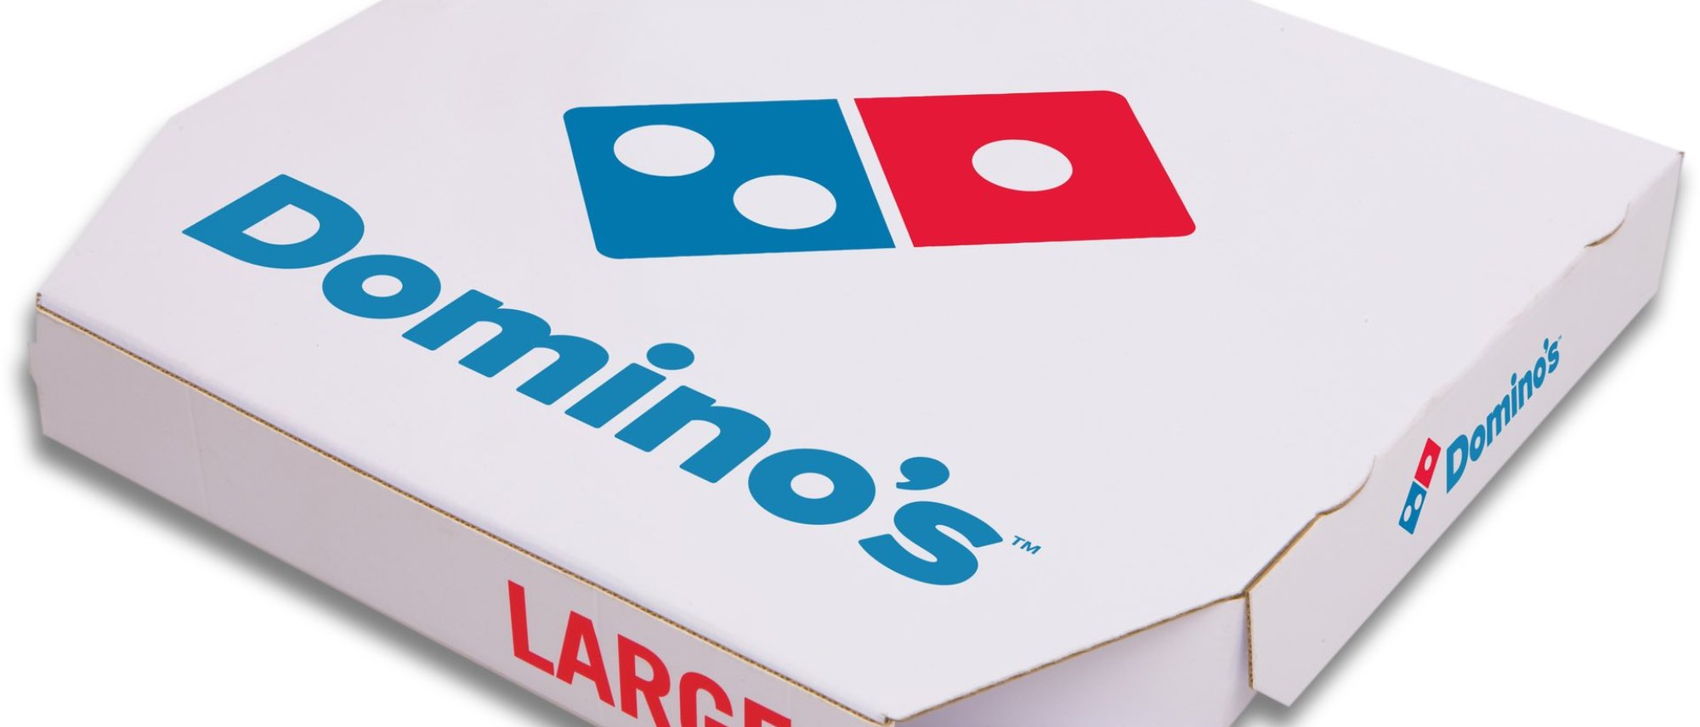 Peter Kozodoy | How Domino's Pizza Went from Honest to Greatness